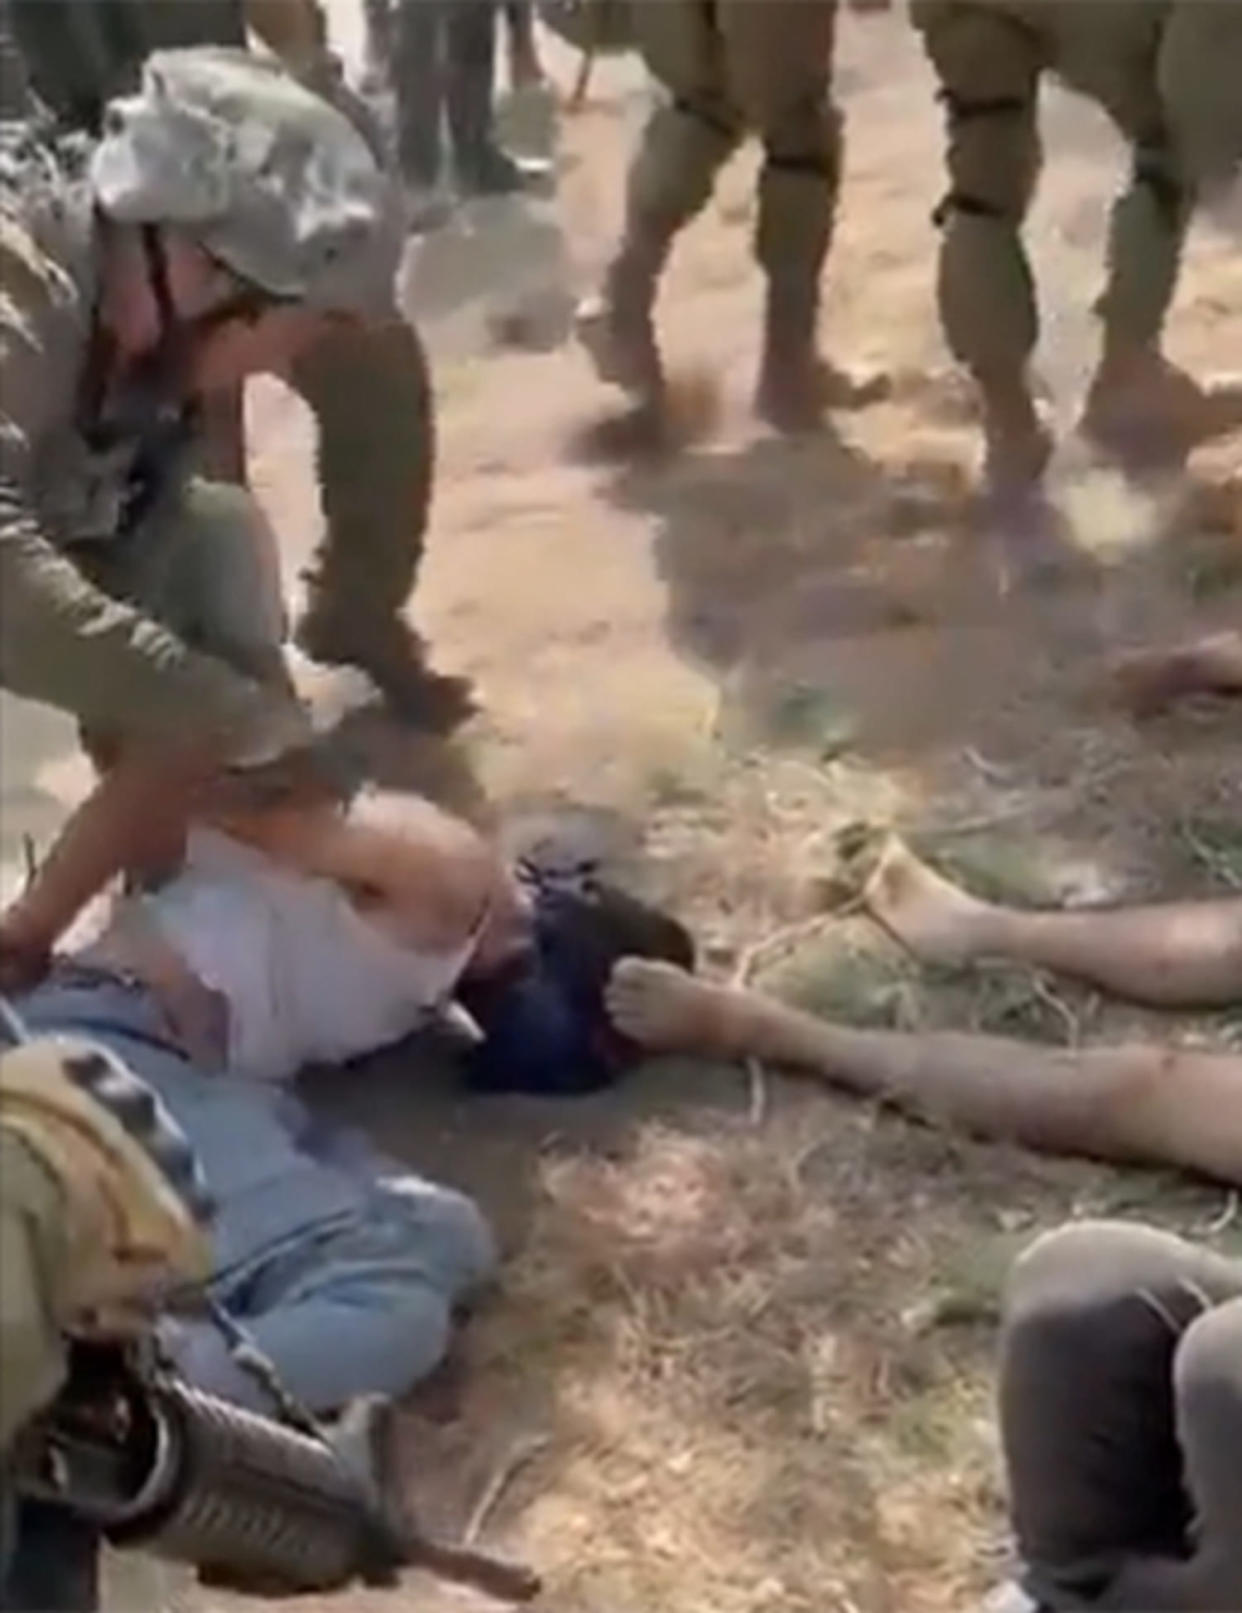 A video appears to show IDF soldiers with detained Palestinians in the West Bank. (via @RamAbdu / X)